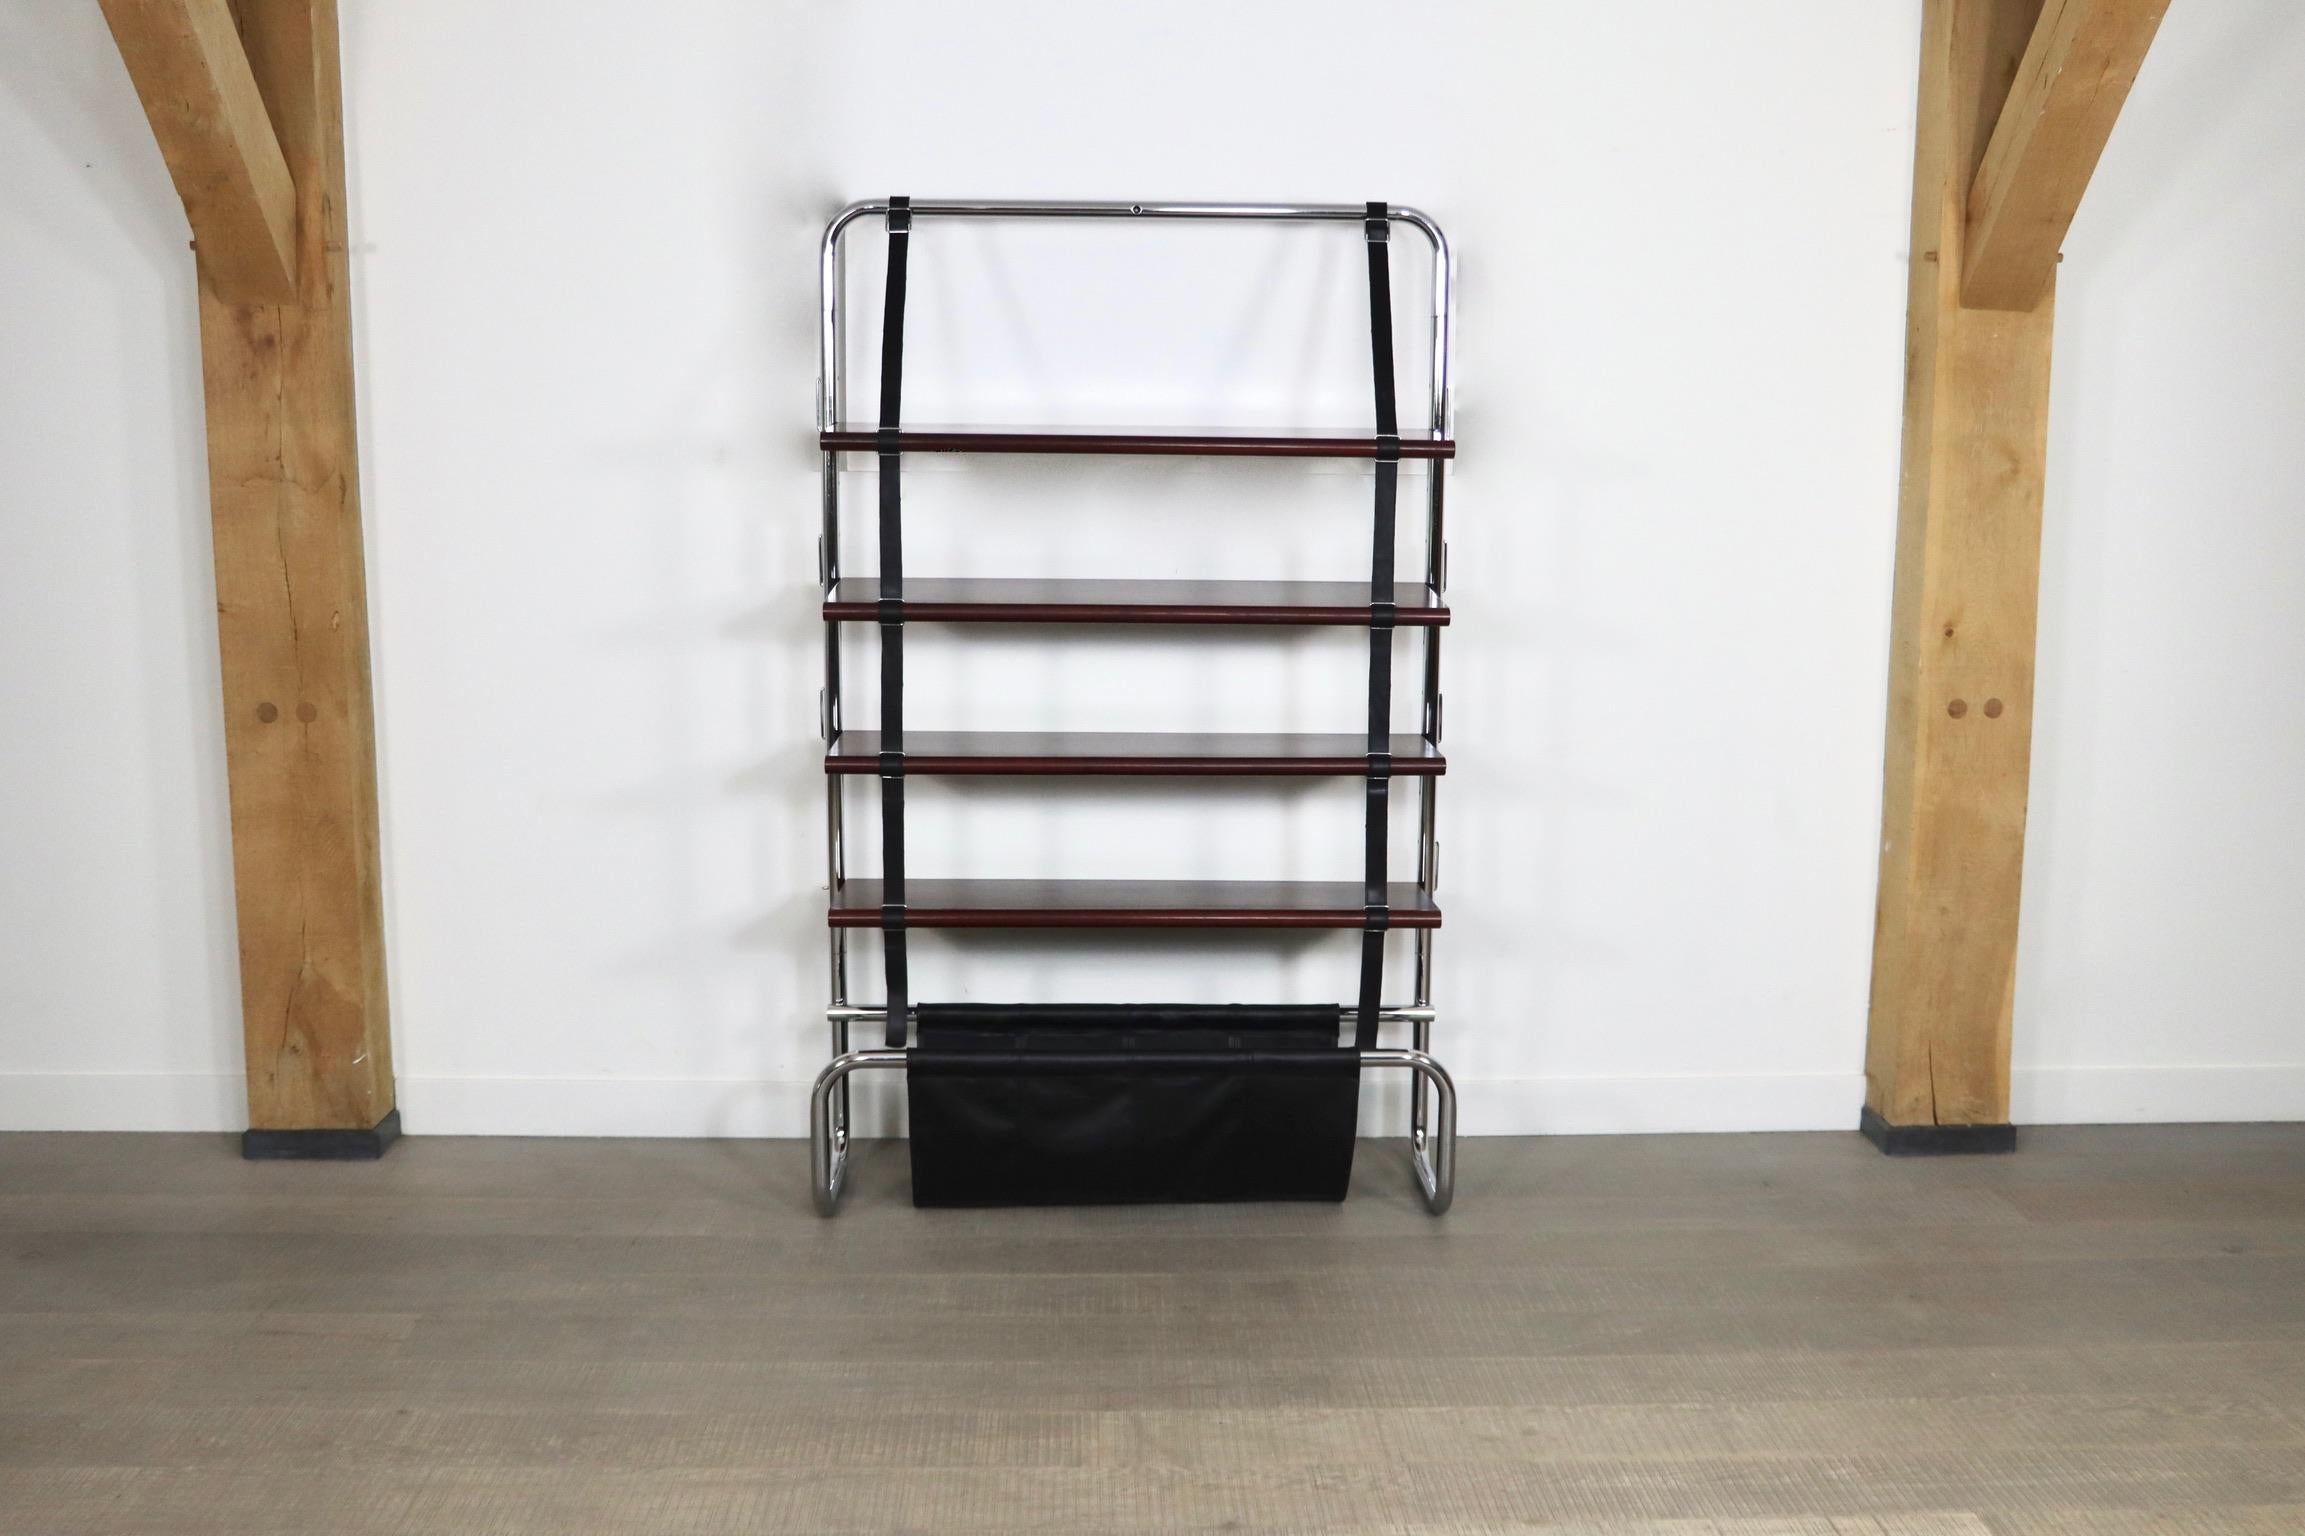 Beautiful Jumbo wall unit designed by Luigi Massoni for Poltrona Frau, Italy 1971. Chromed tubular steel frame with cherry wood shelves suspended by black leather straps. At the base there is a black saddle leather pouch - perfect for holding